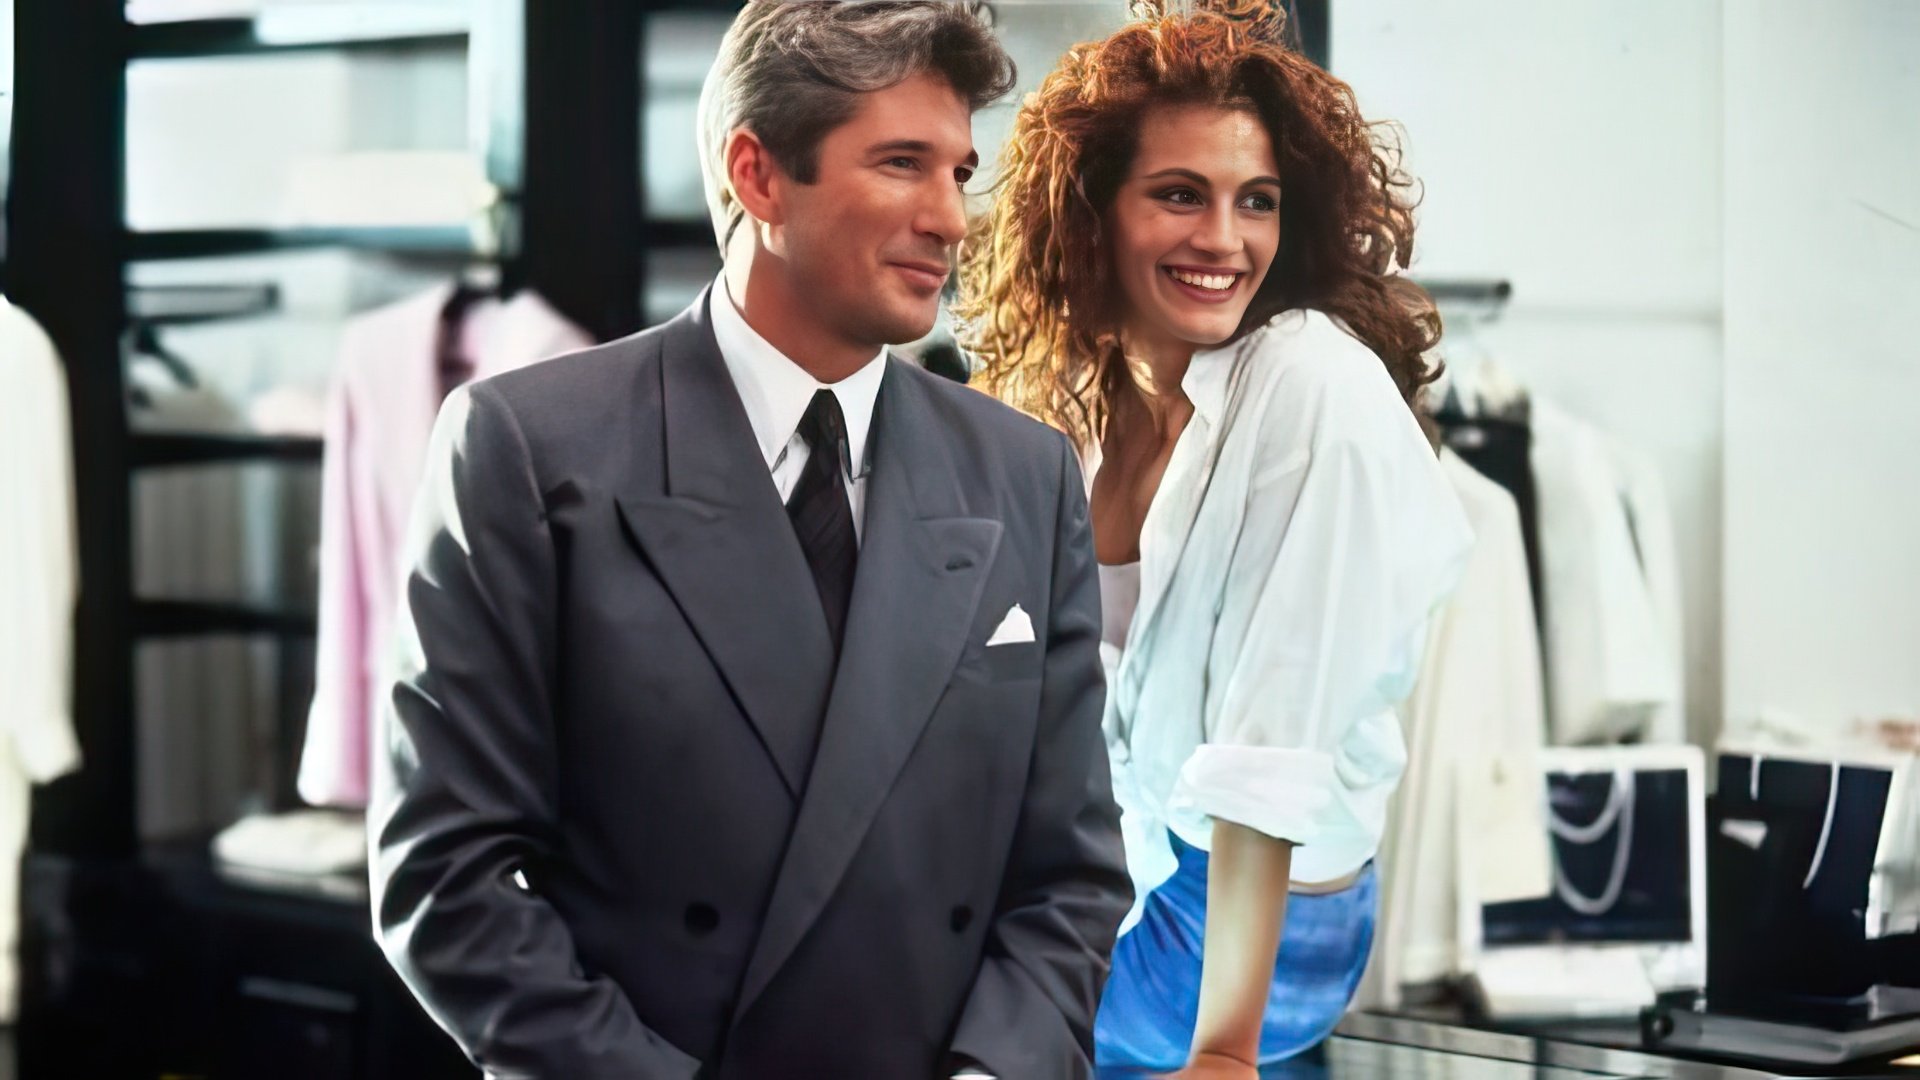 Richard Gere and Julia Roberts on the set of the Pretty Woman